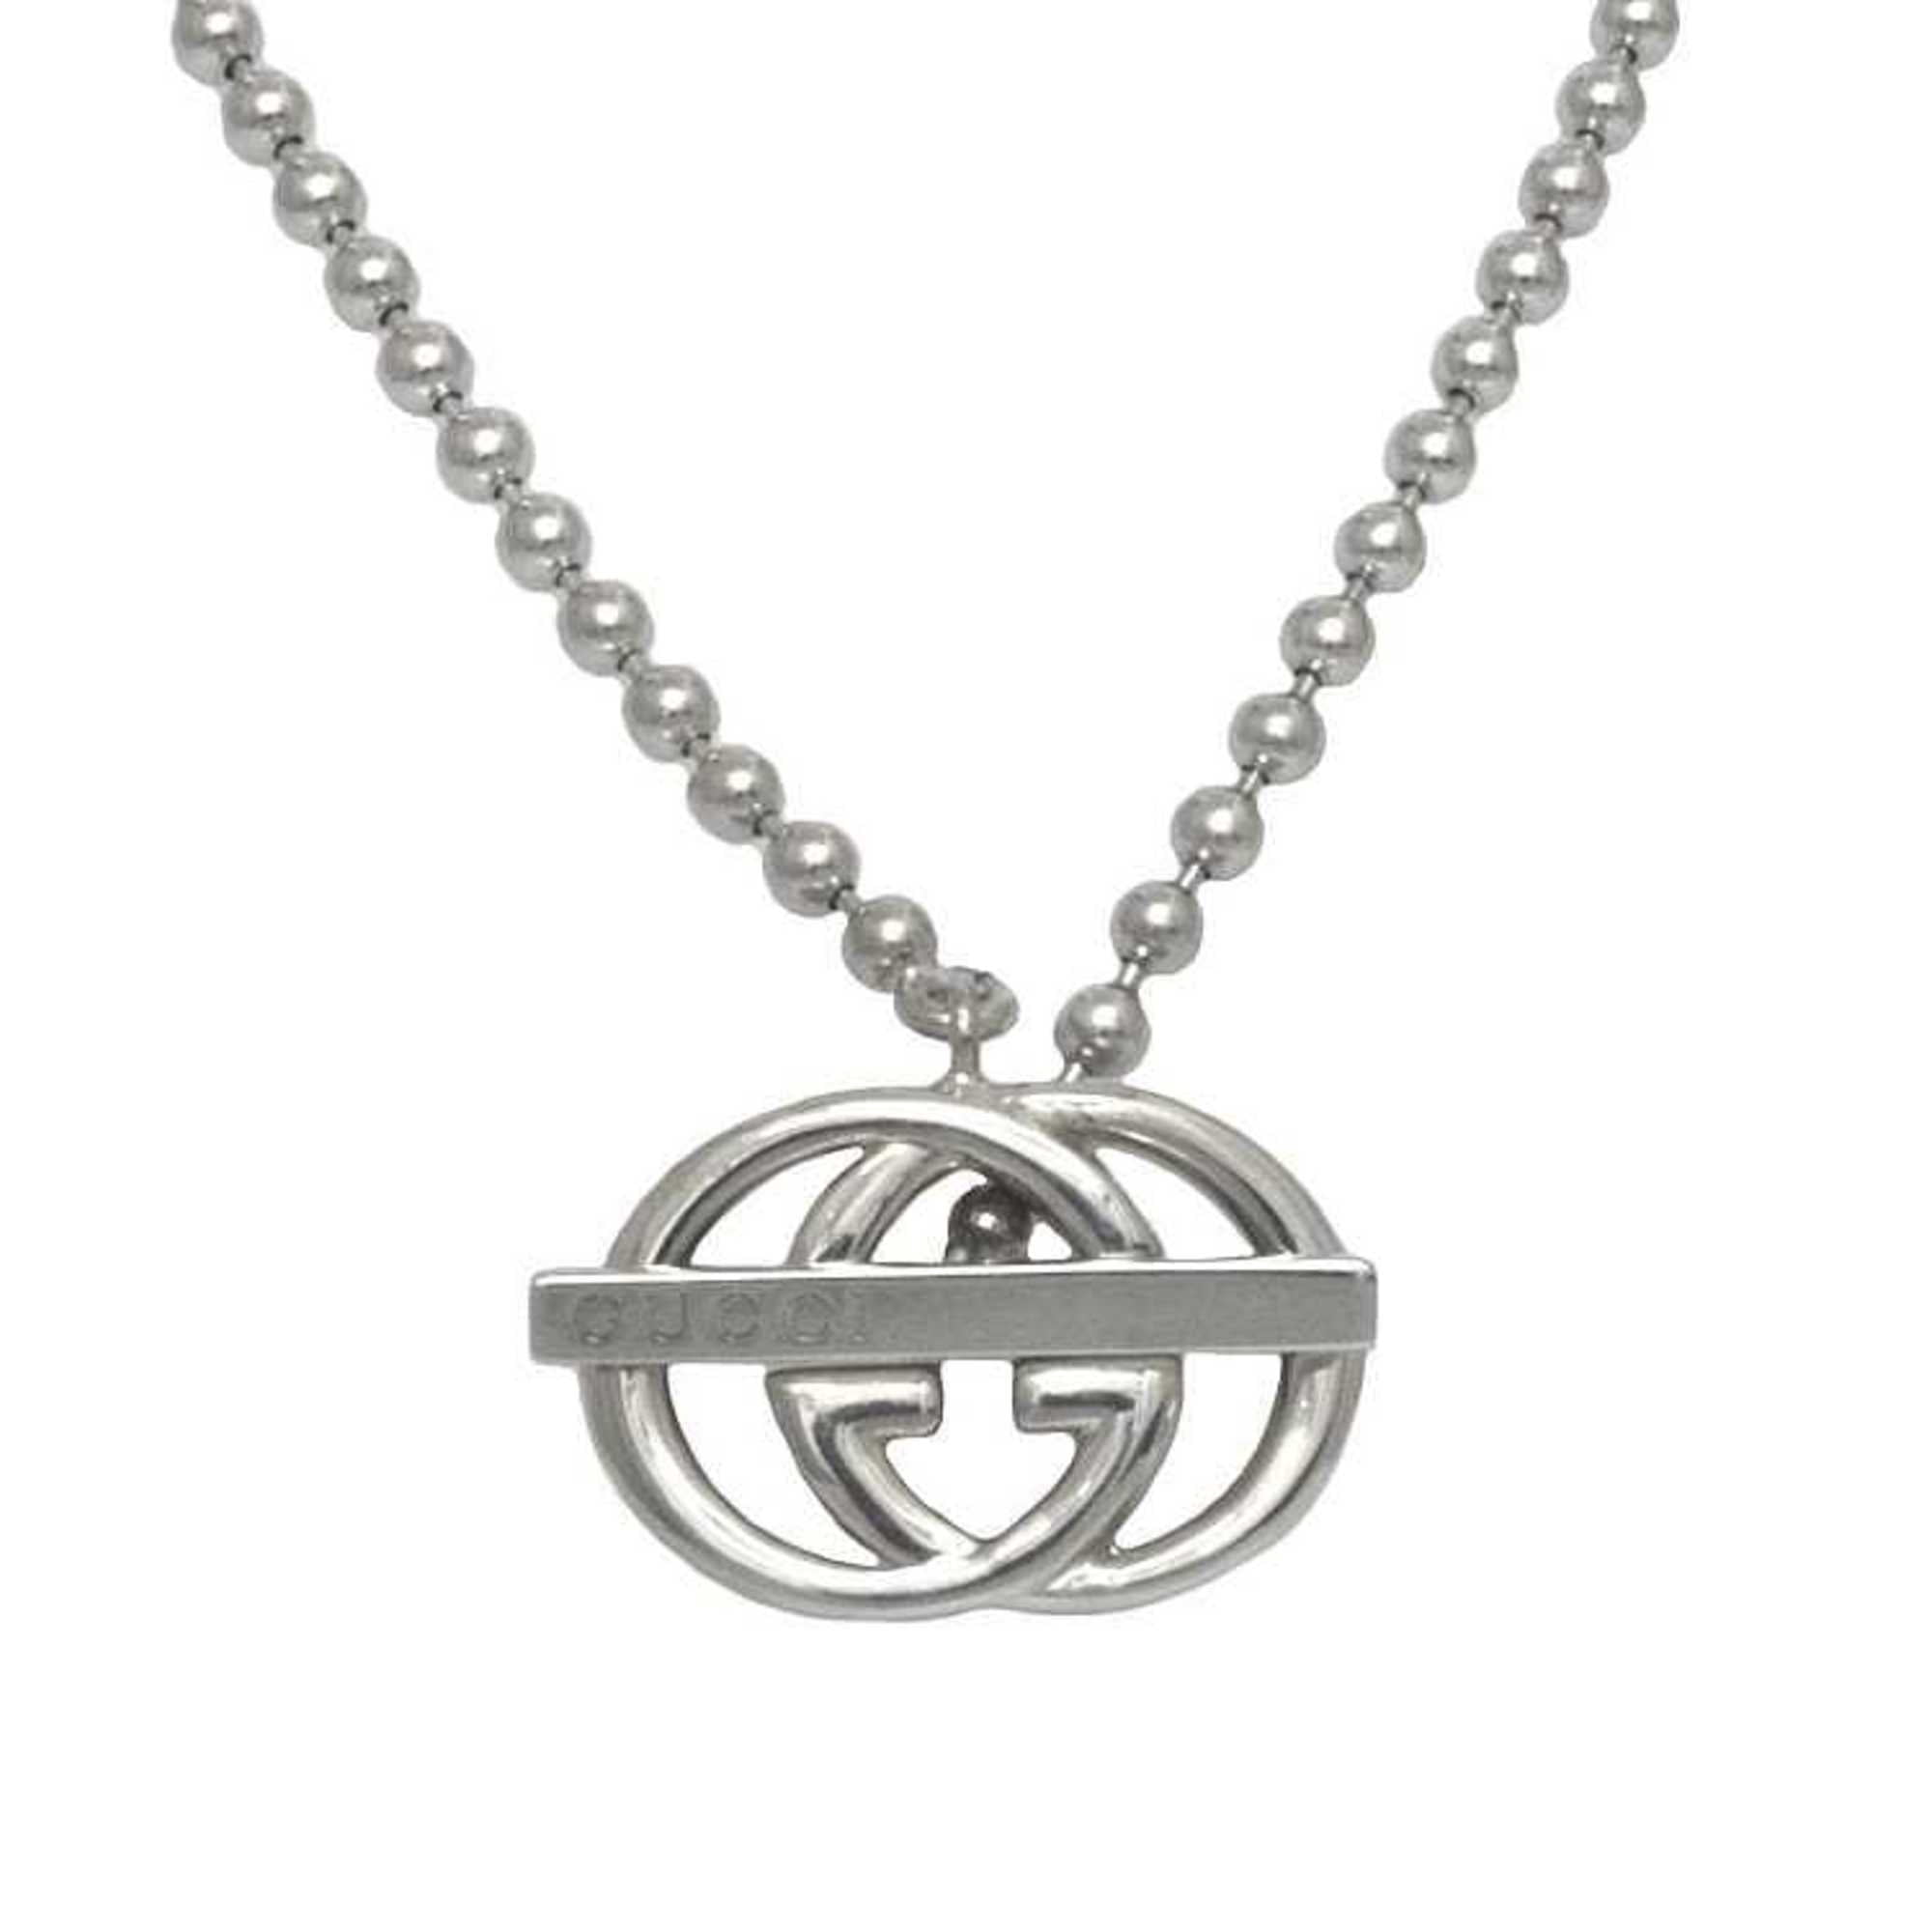 Authenticated Used Gucci ball chain necklace sterling silver interlocking Ag 925 GG double G women's men's unisex pendant -